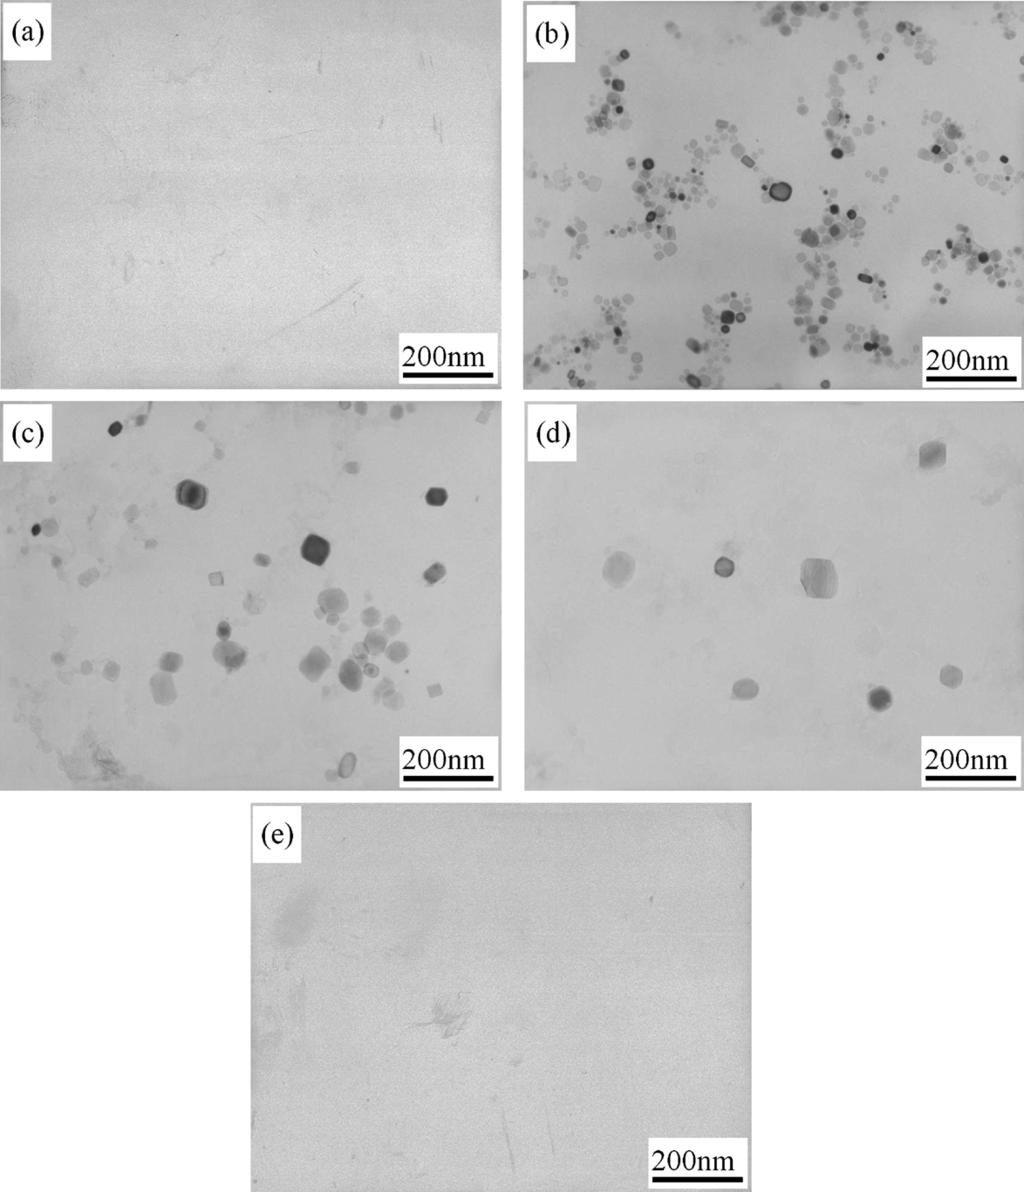 TEM micrographs of the pearlite microstructure in Nb bearing weld metal normalized at different temperatures for 2 h: (a) lamellar pearlite normalized at 920 C; (b) degenerated pearlite normalized at